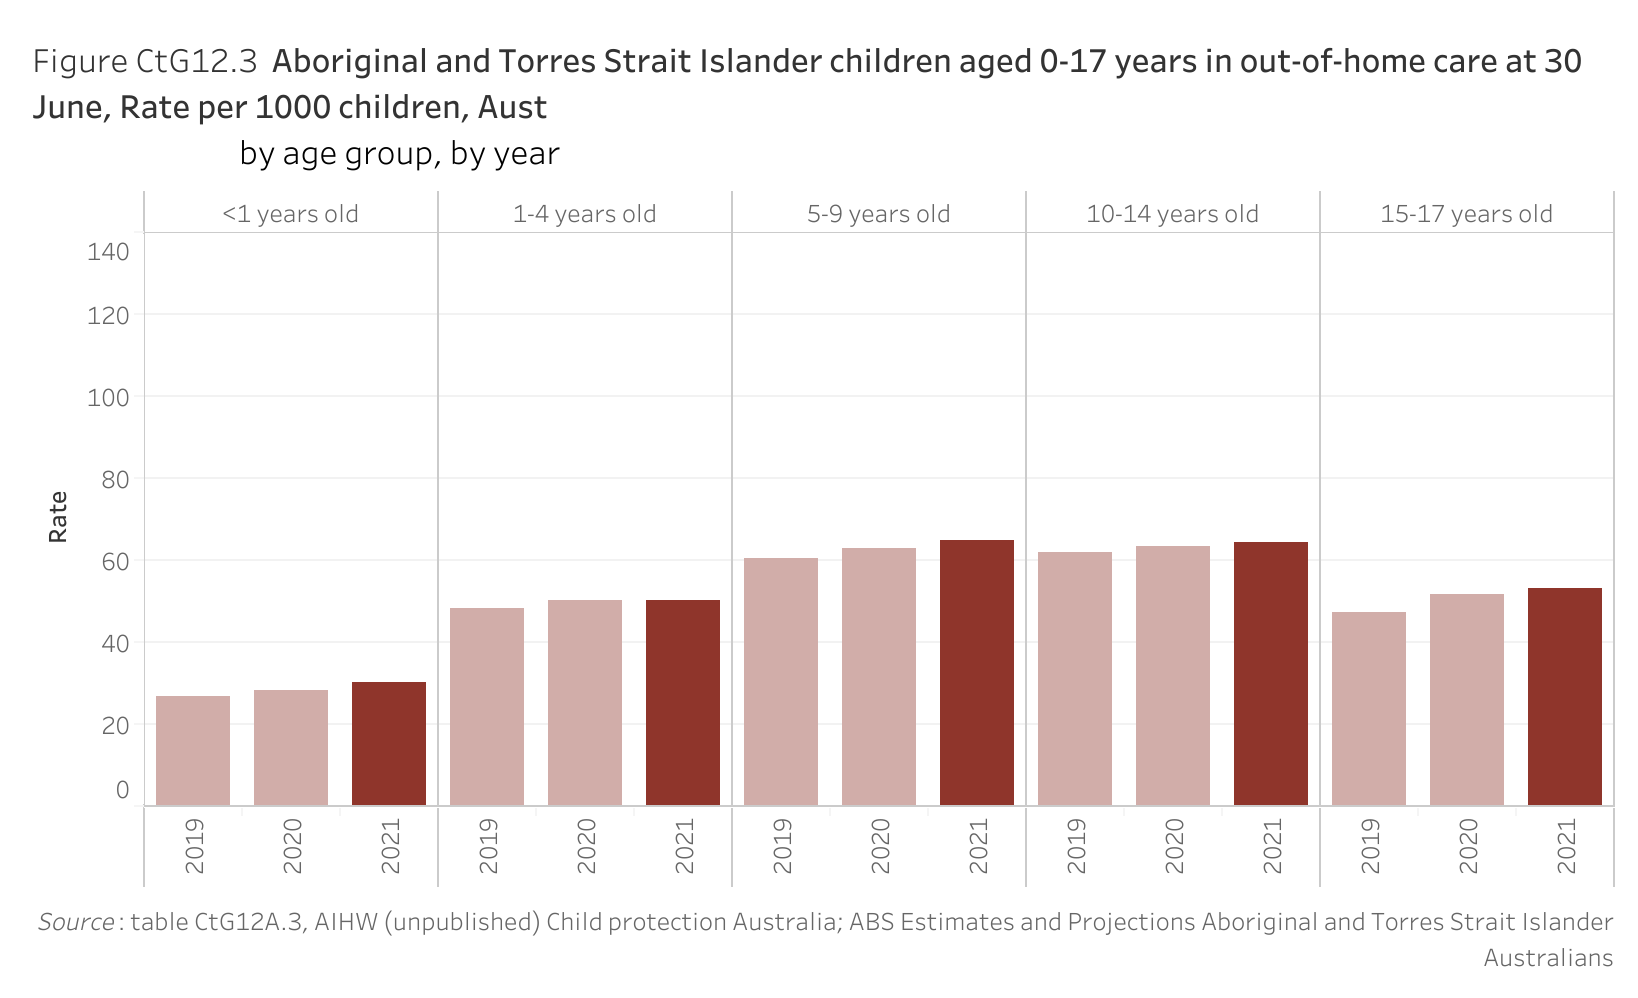 Figure CtG12.3. Bar chart showing the rate of Aboriginal and Torres Strait Islander children aged 0-17 years in out-of-home care per 1000 population at 30 June in Australia, by age group and by year. Data table of figure CtG12.3 is below.